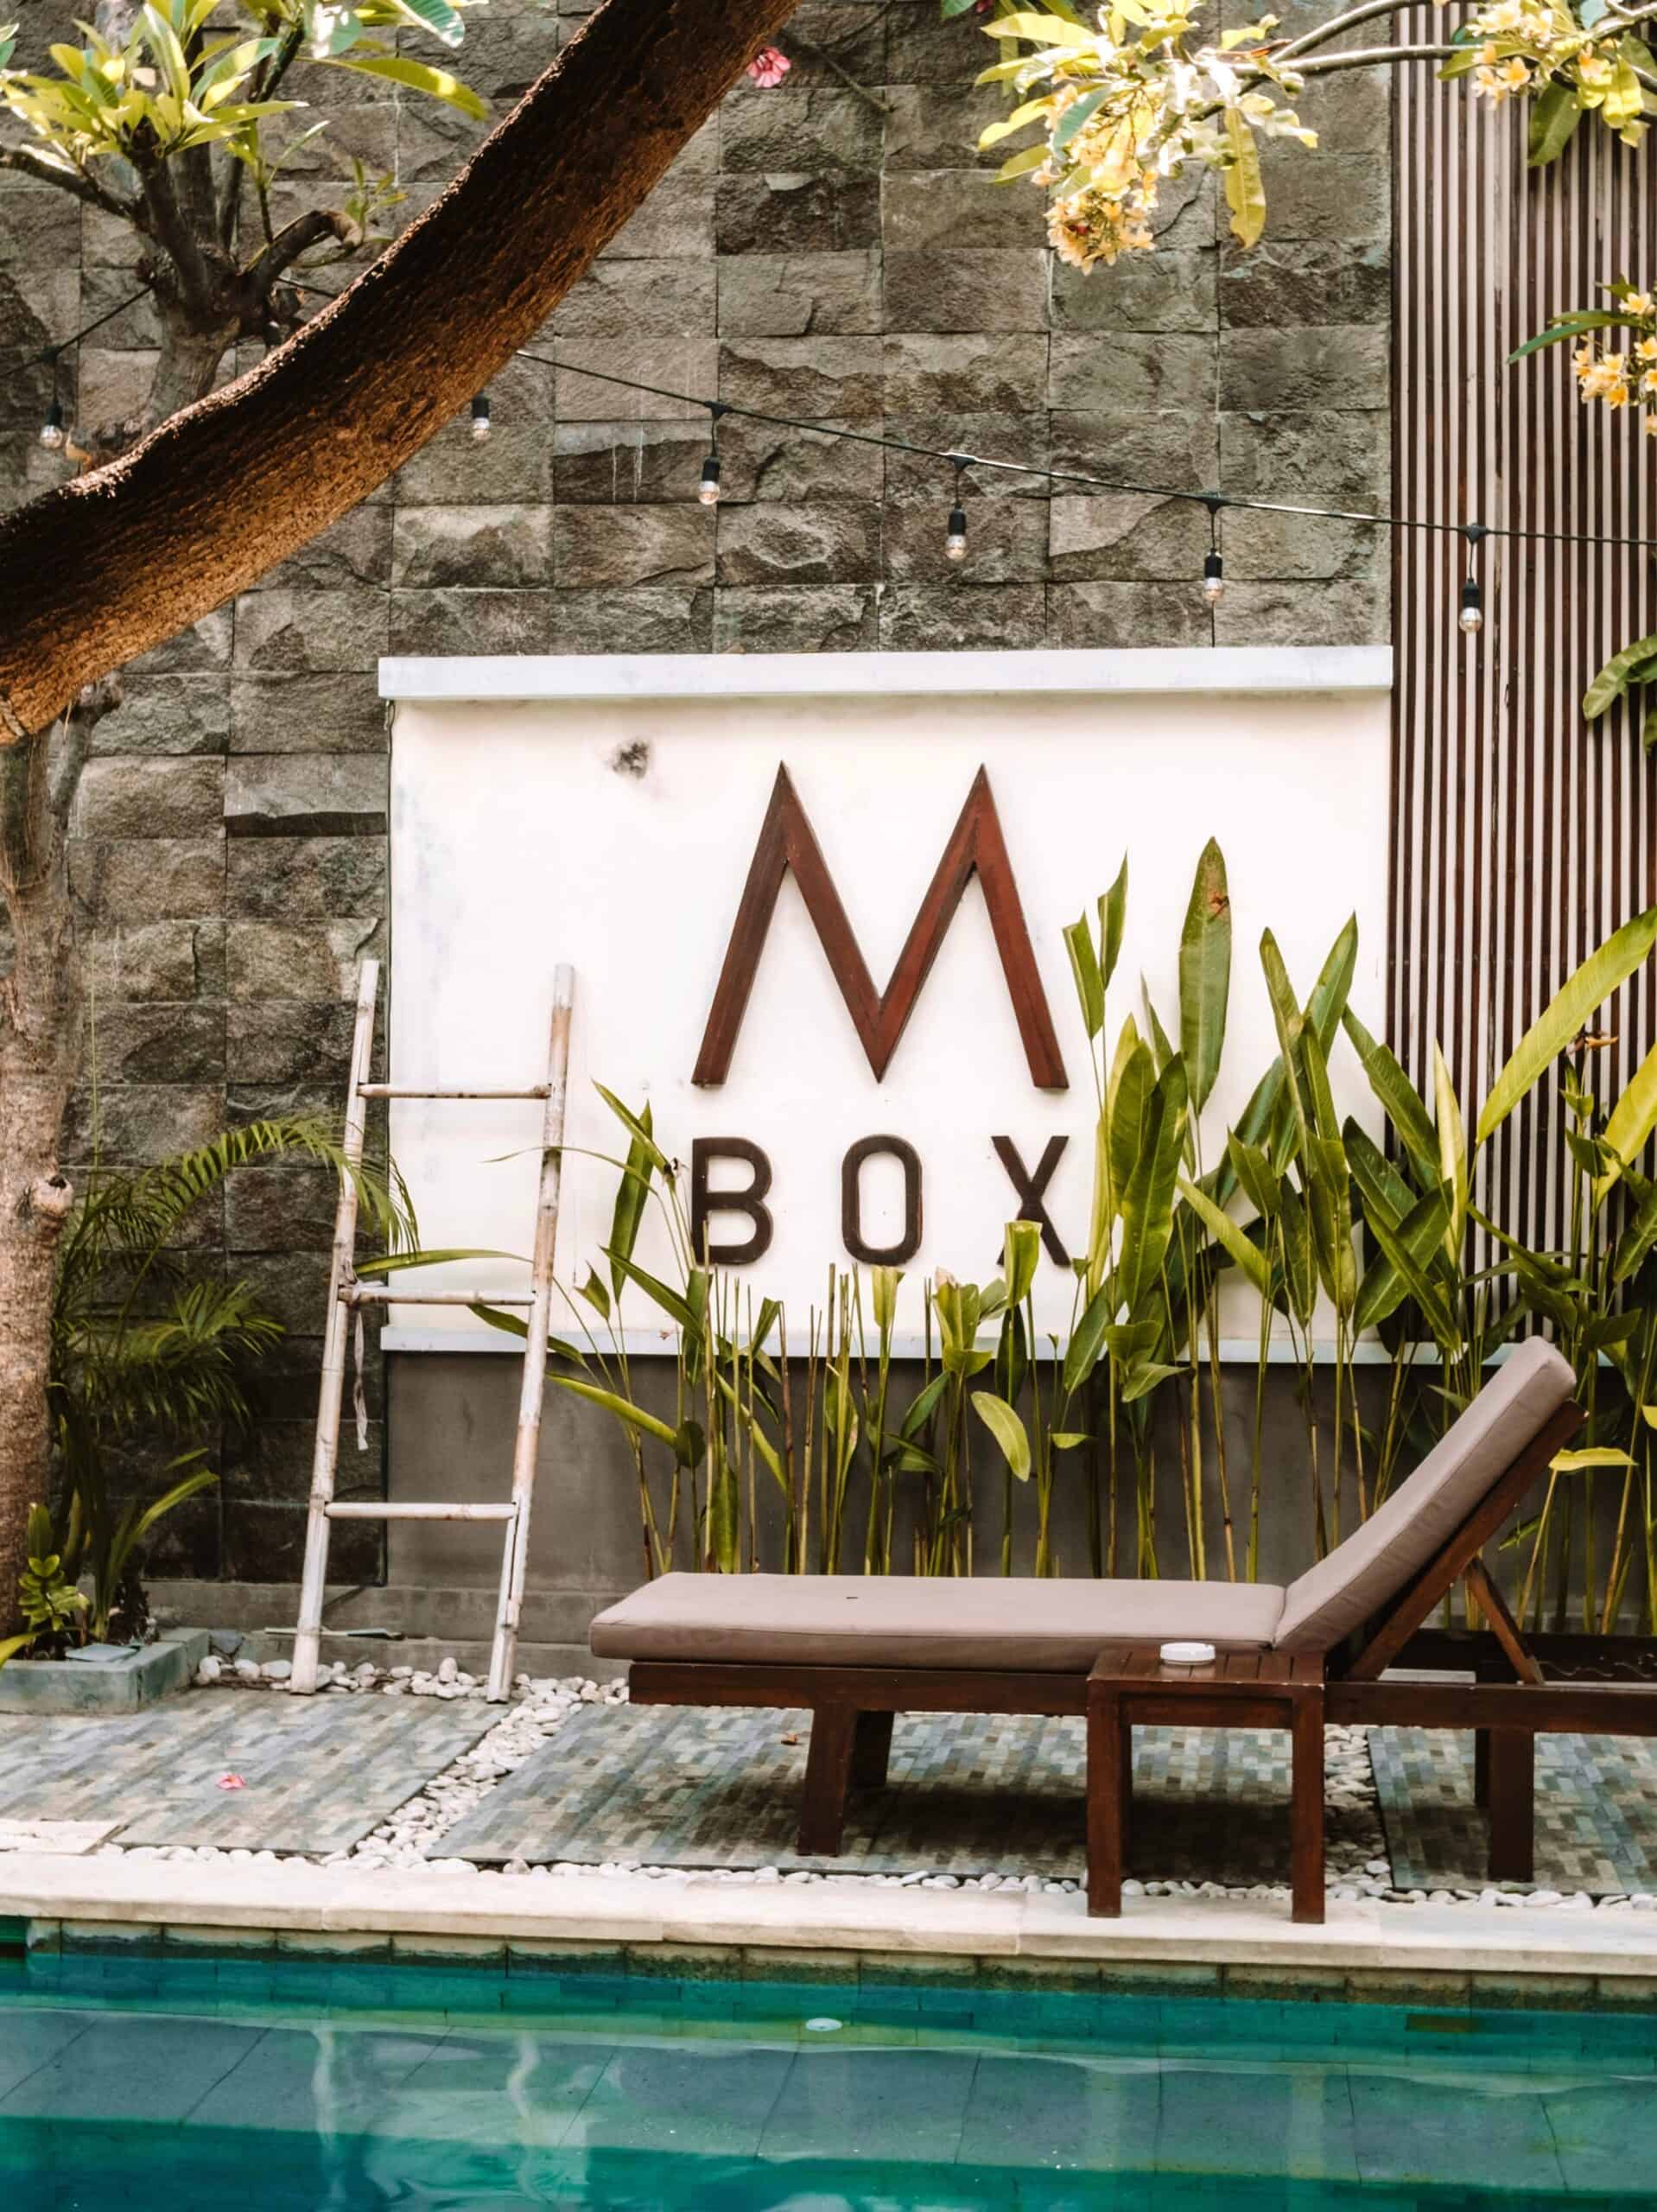 M Box hostel is the perfect accommodation on Gili Trawangan for solo travelers